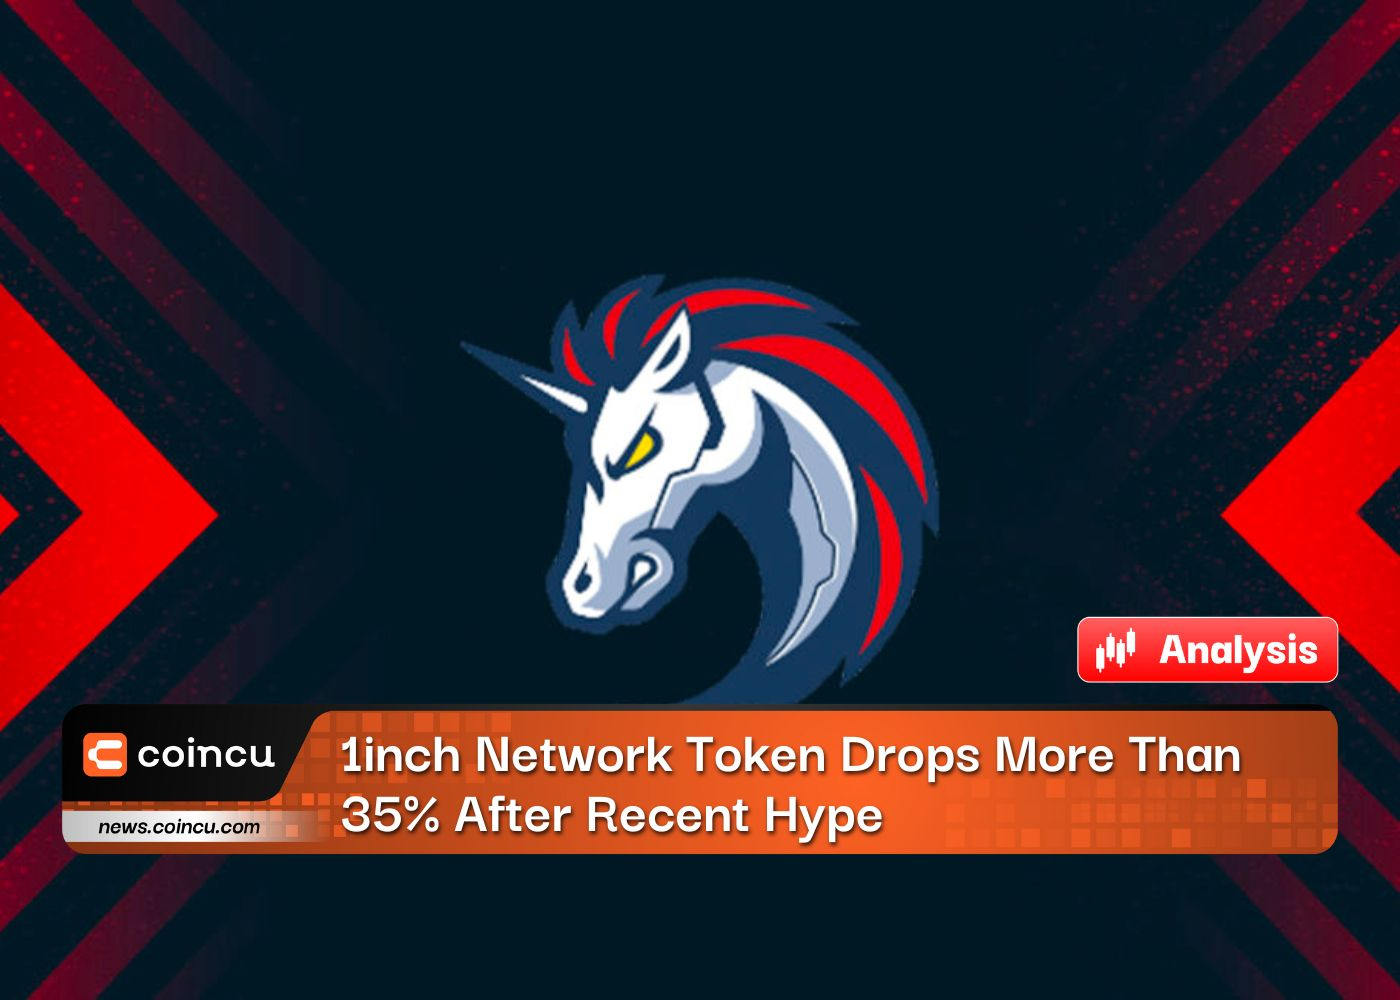 1inch Network Token Drops More Than 35% After Recent Hype